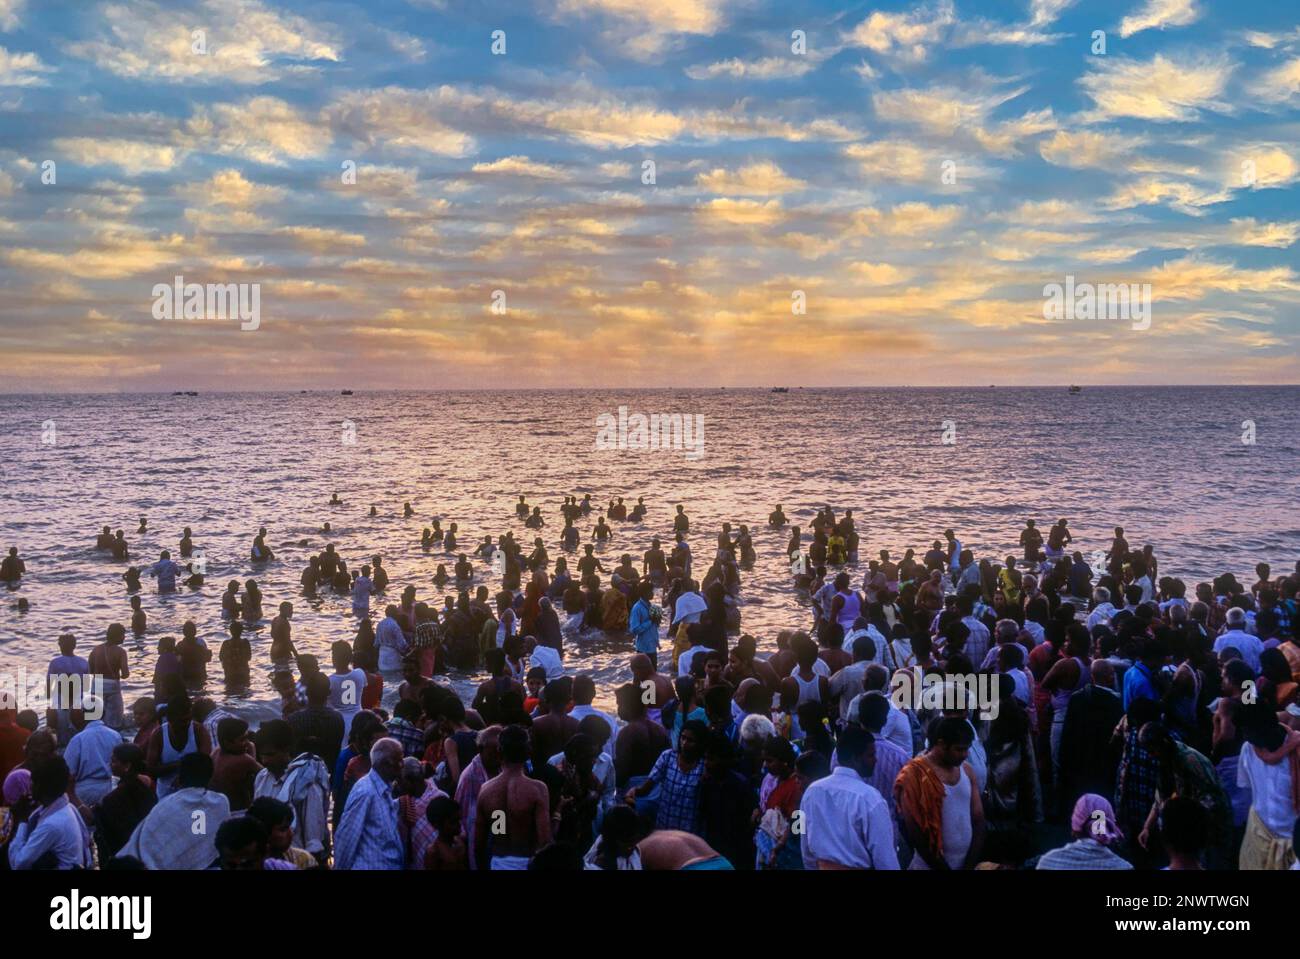 Devotees taking a dip in the holy waters of the Agni Theertham in Rameswaram, Tamil Nadu, South India, India, Asia. Bay of Bengal. Sunrise Stock Photo